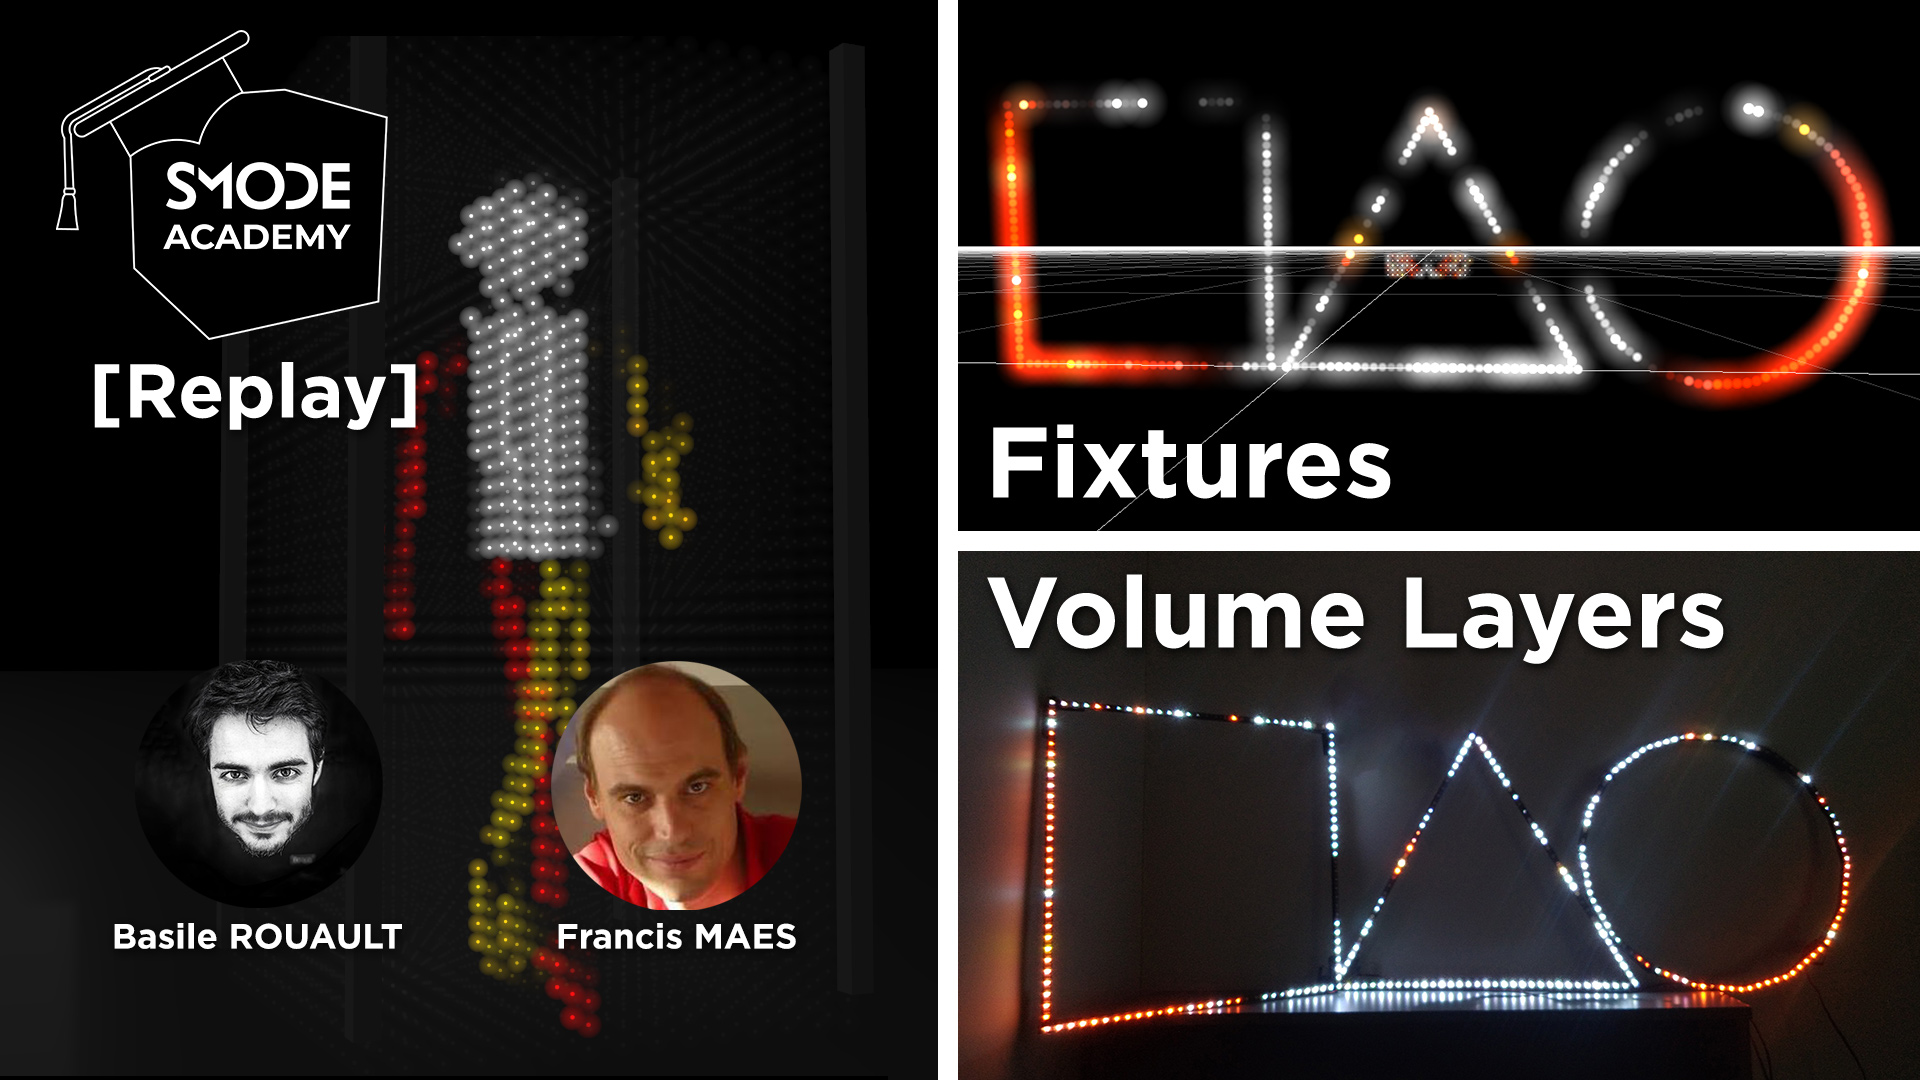 Led fixtures & Volume Layers